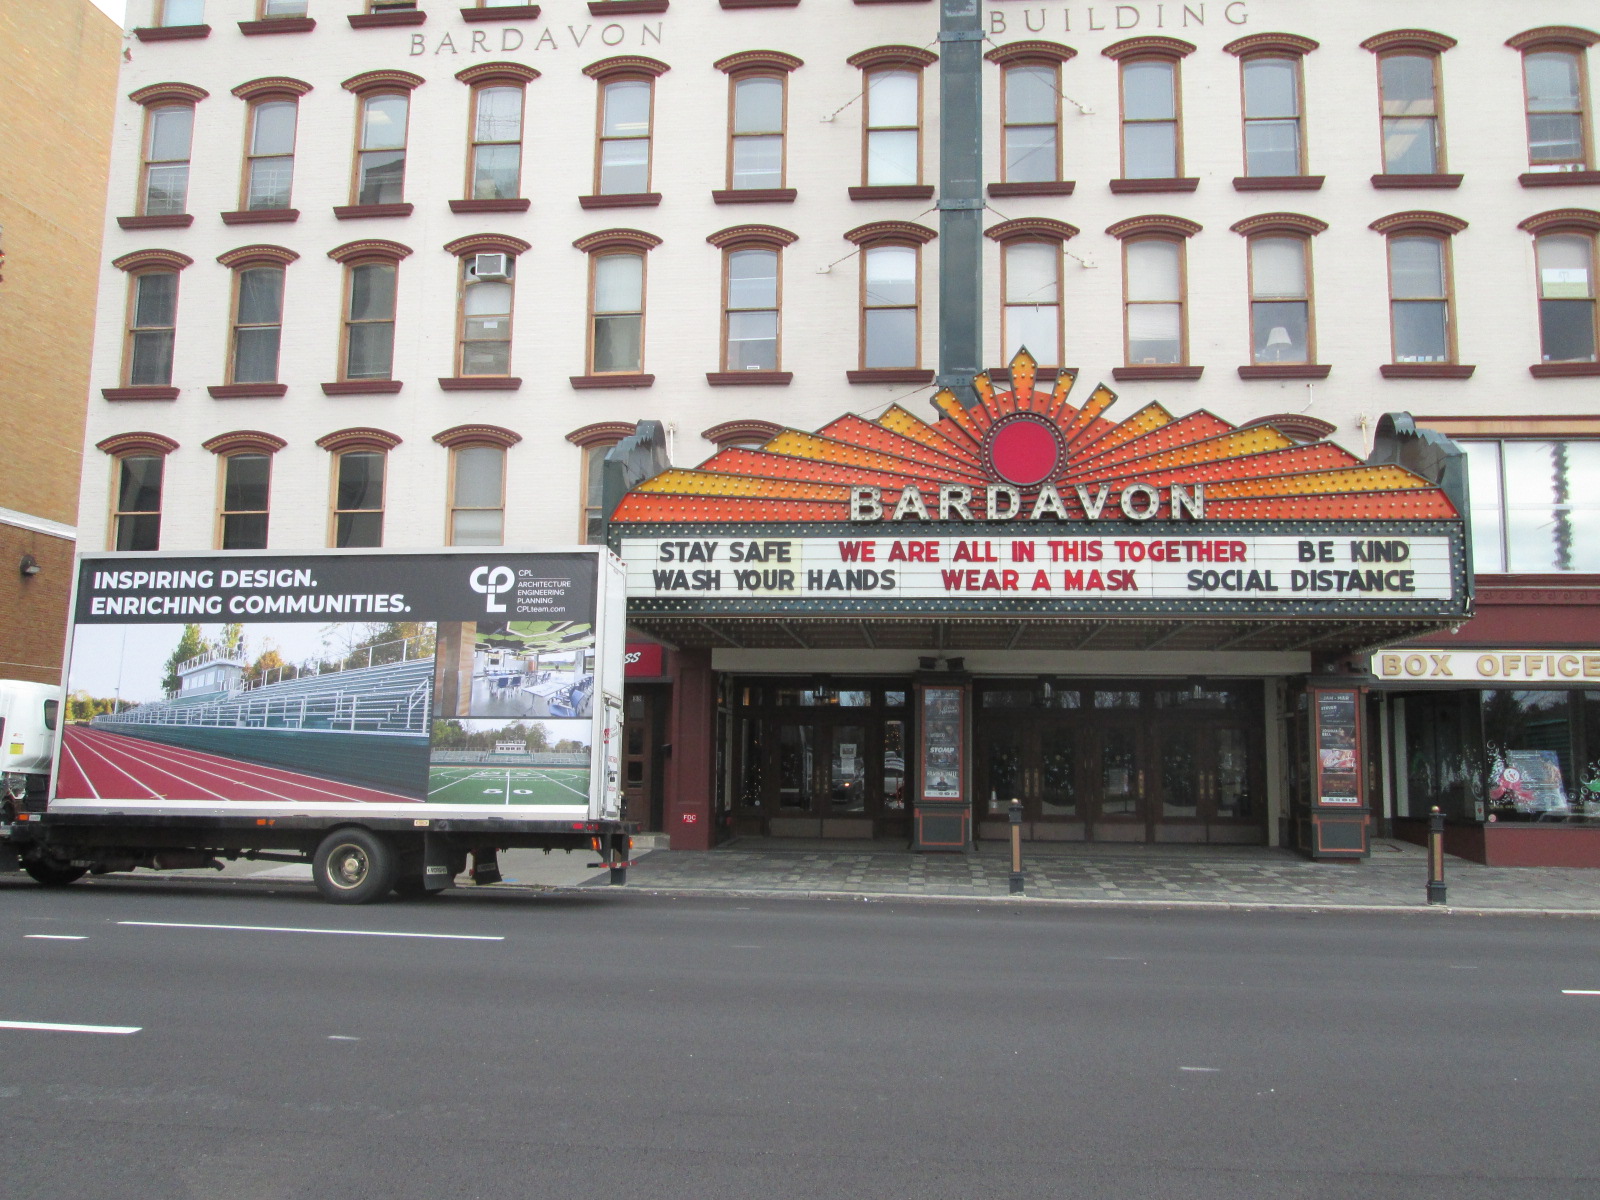 Mobile billboard stopped at the Bardavon Theater in Poughkeepsie NY.